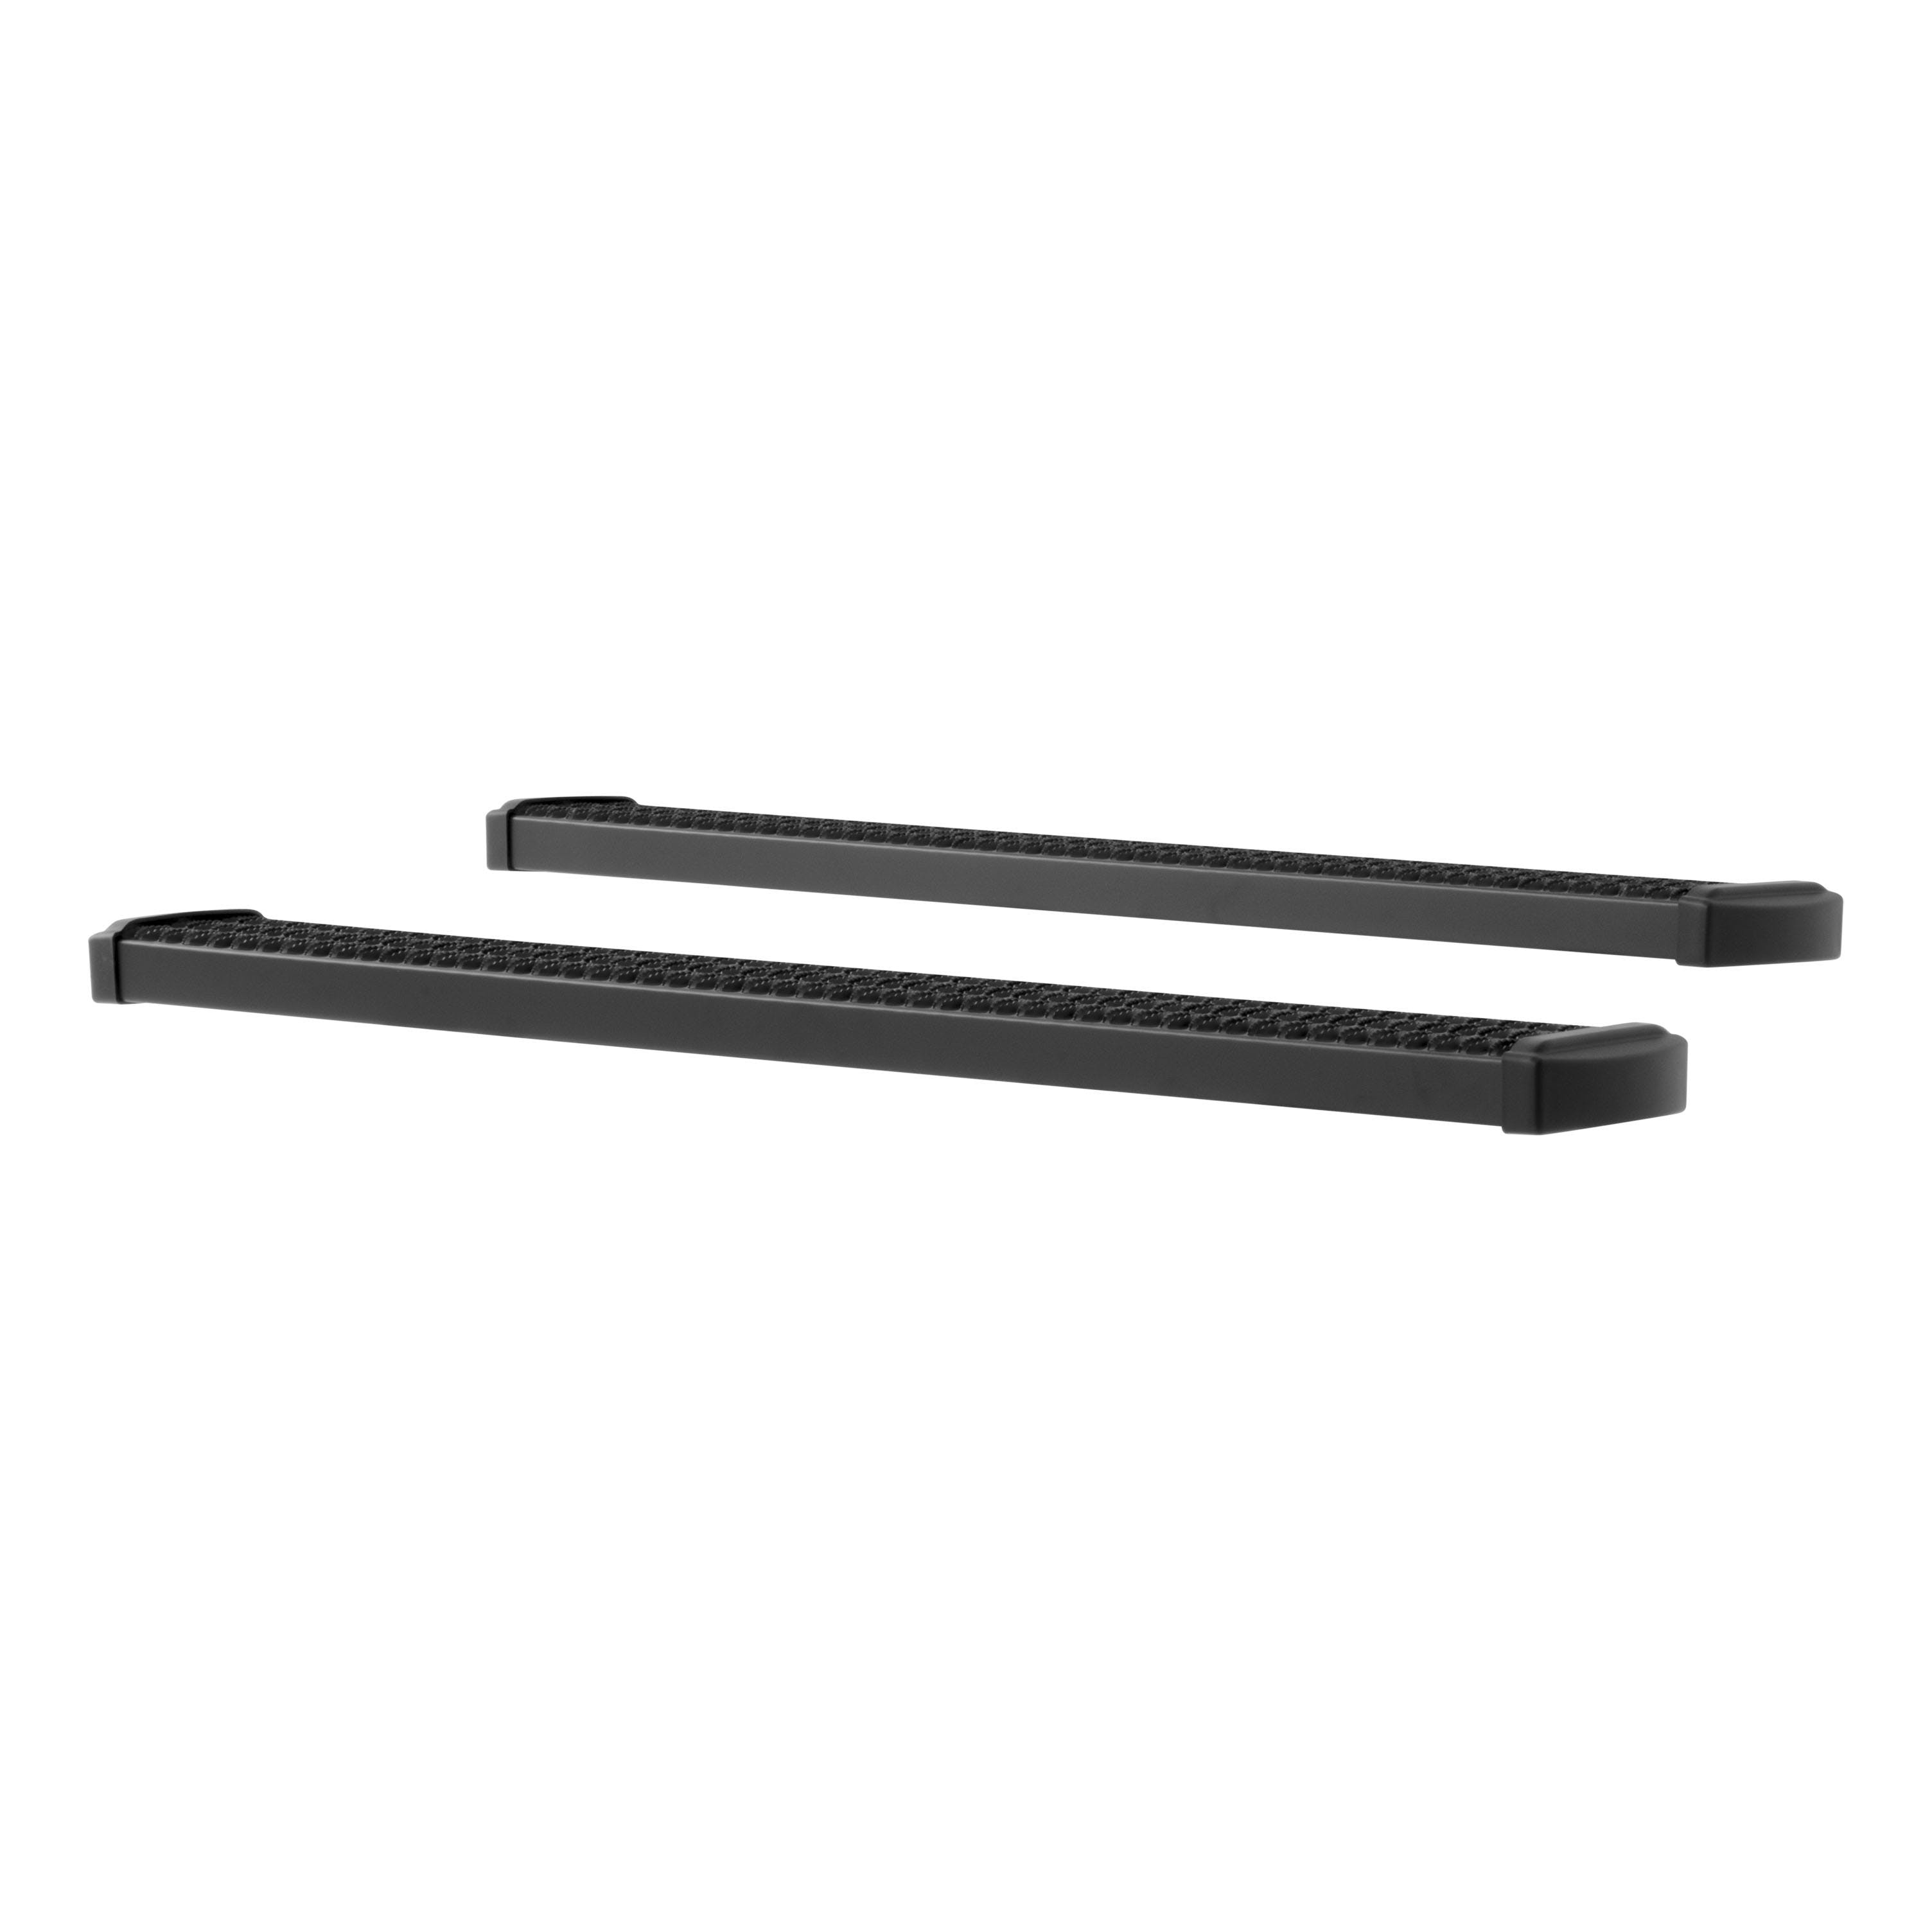 LUVERNE 415060-400921 Grip Step 7 inch Running Boards